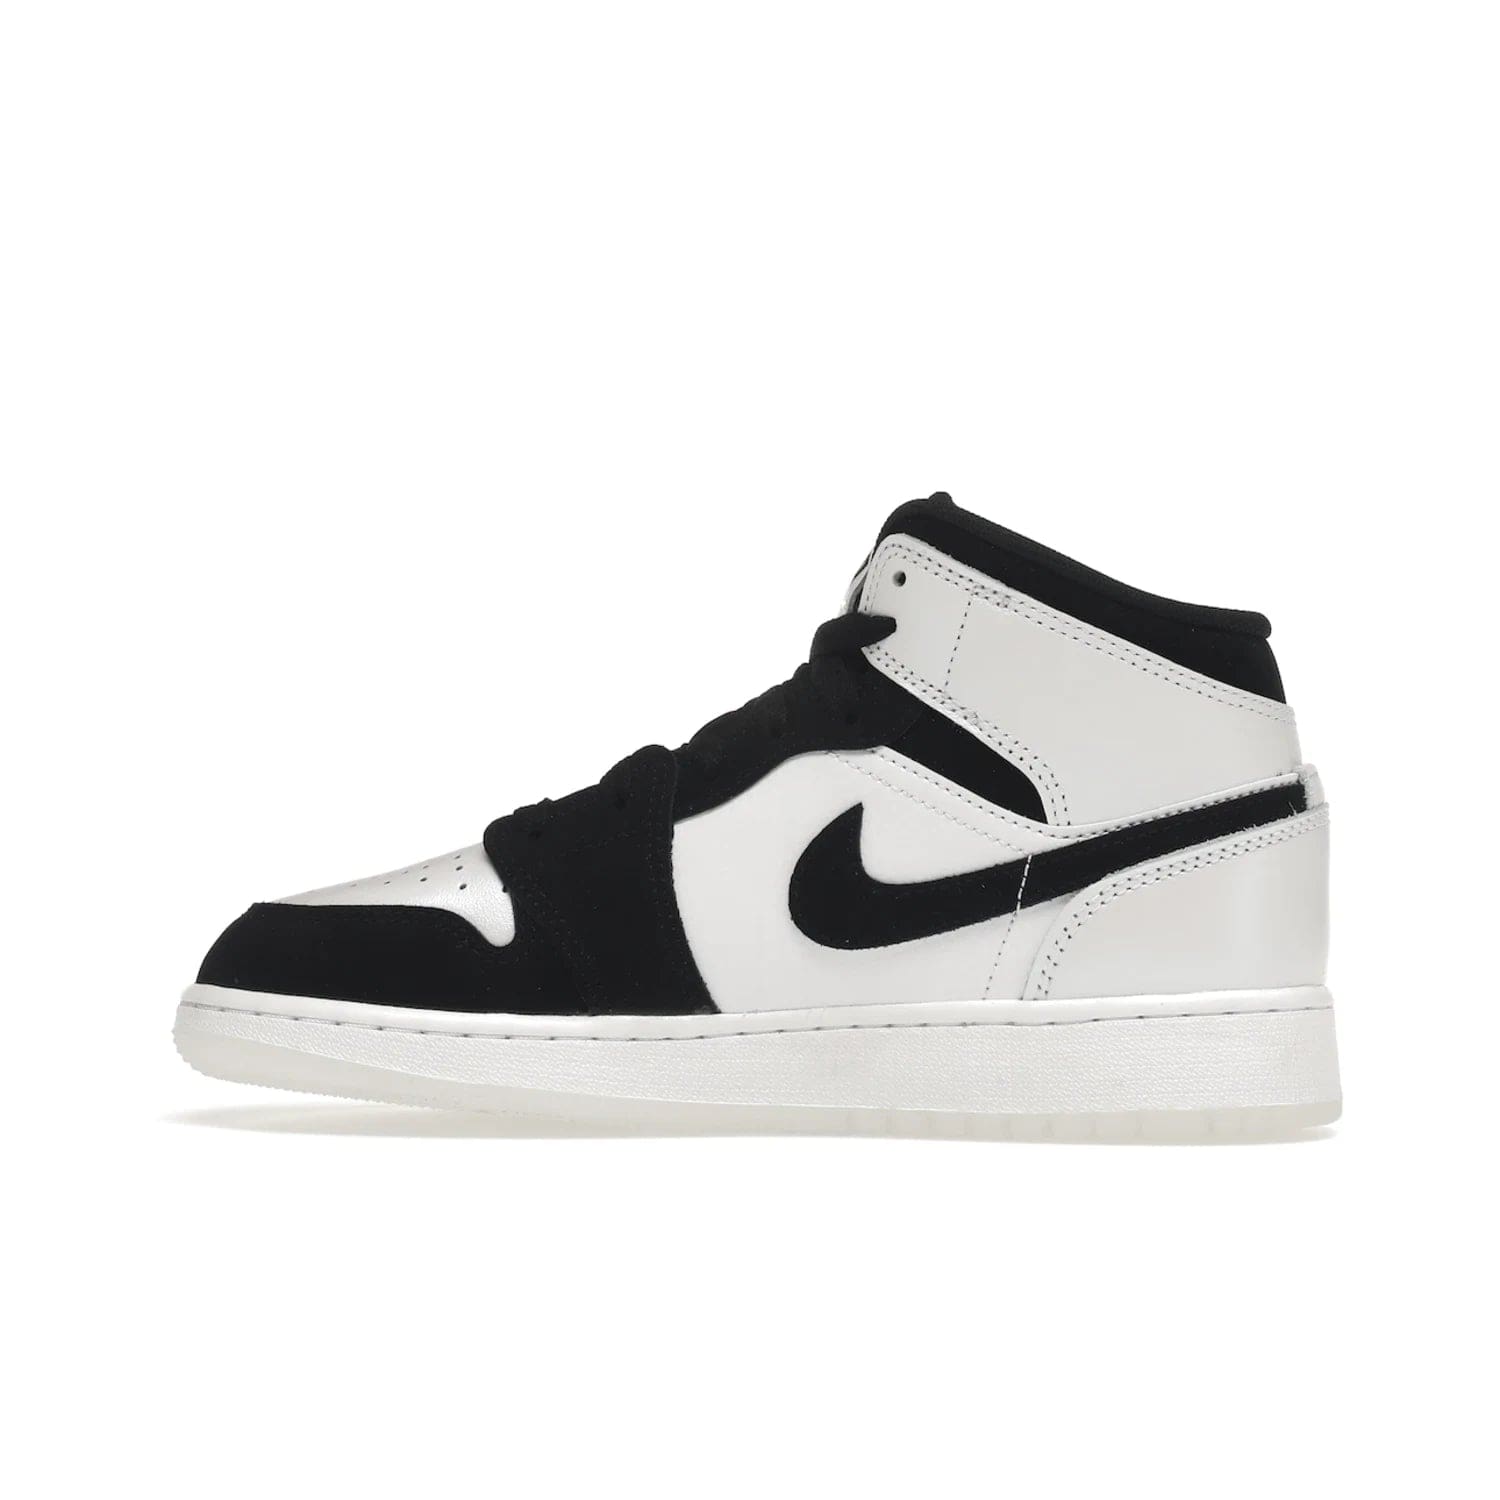 Jordan 1 Mid Diamond Shorts (GS) - Image 20 - Only at www.BallersClubKickz.com - Get the Jordan 1 Mid Diamond Shorts GS on 9th Feb 2022! Features a white, black & suede design with nylon tongue, stamped wings logo, rubber midsole & outsole. Only $100!